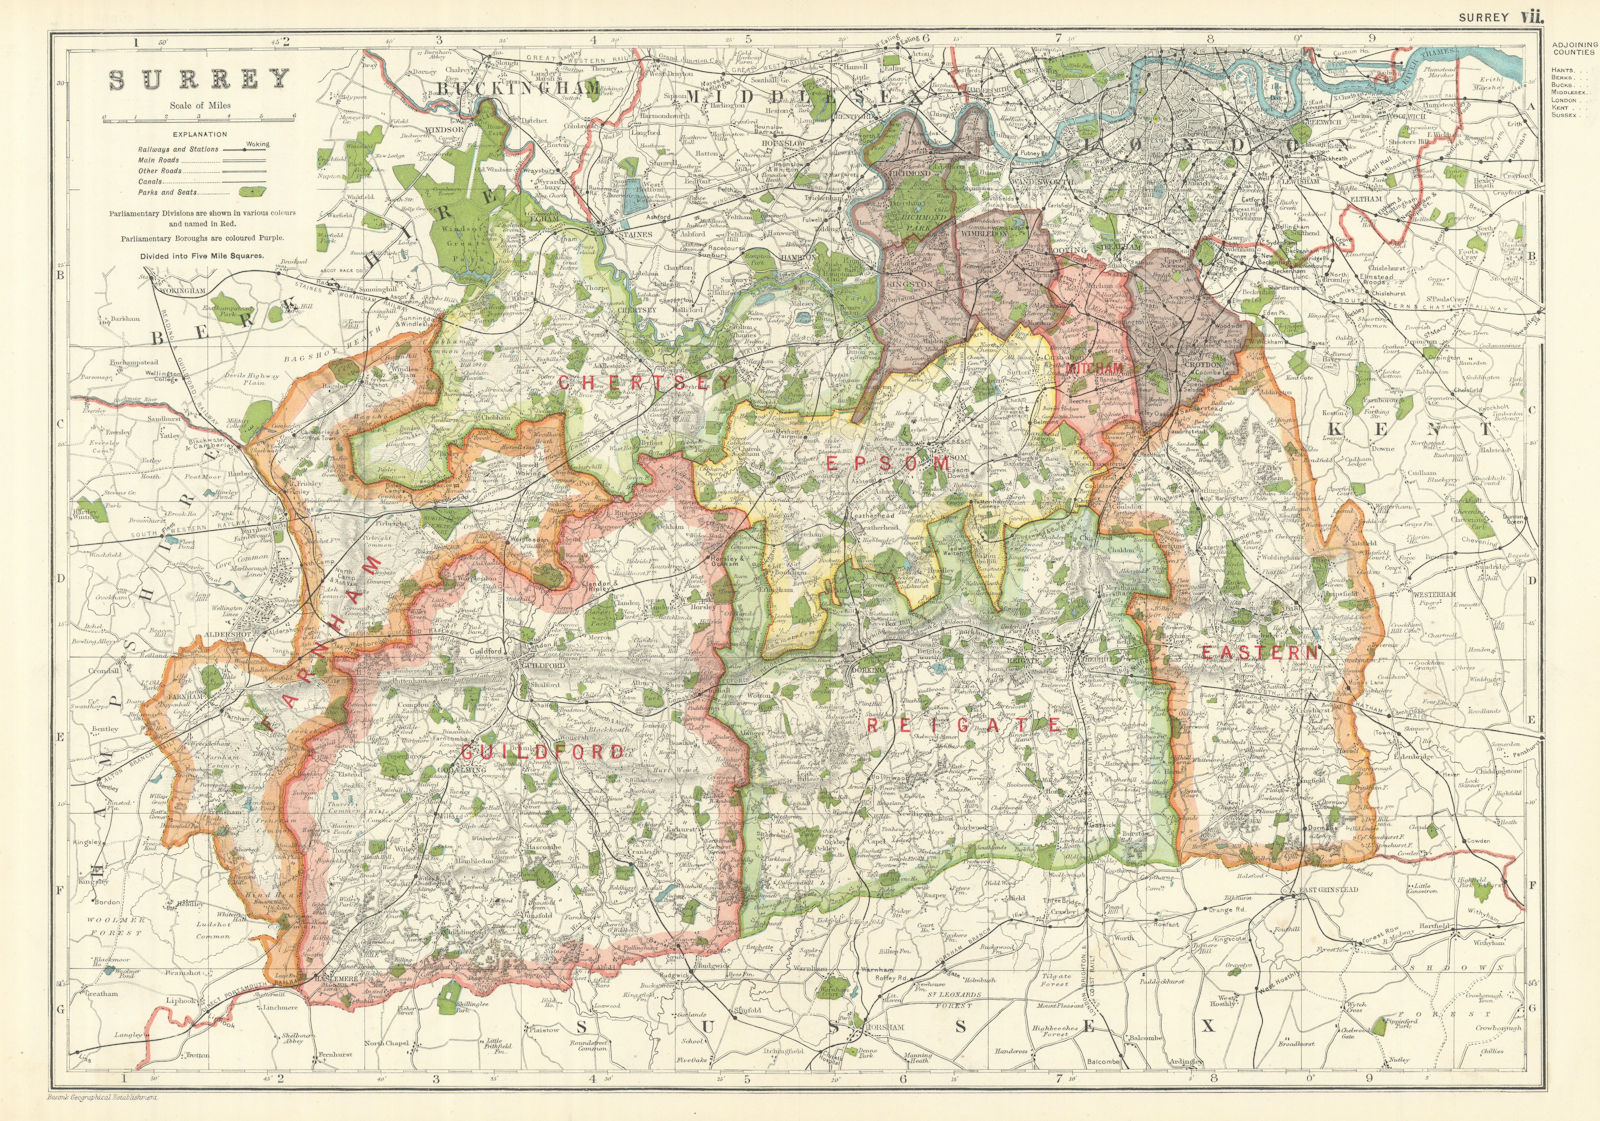 SURREY. Showing Parliamentary divisions, boroughs & parks. BACON 1919 old map